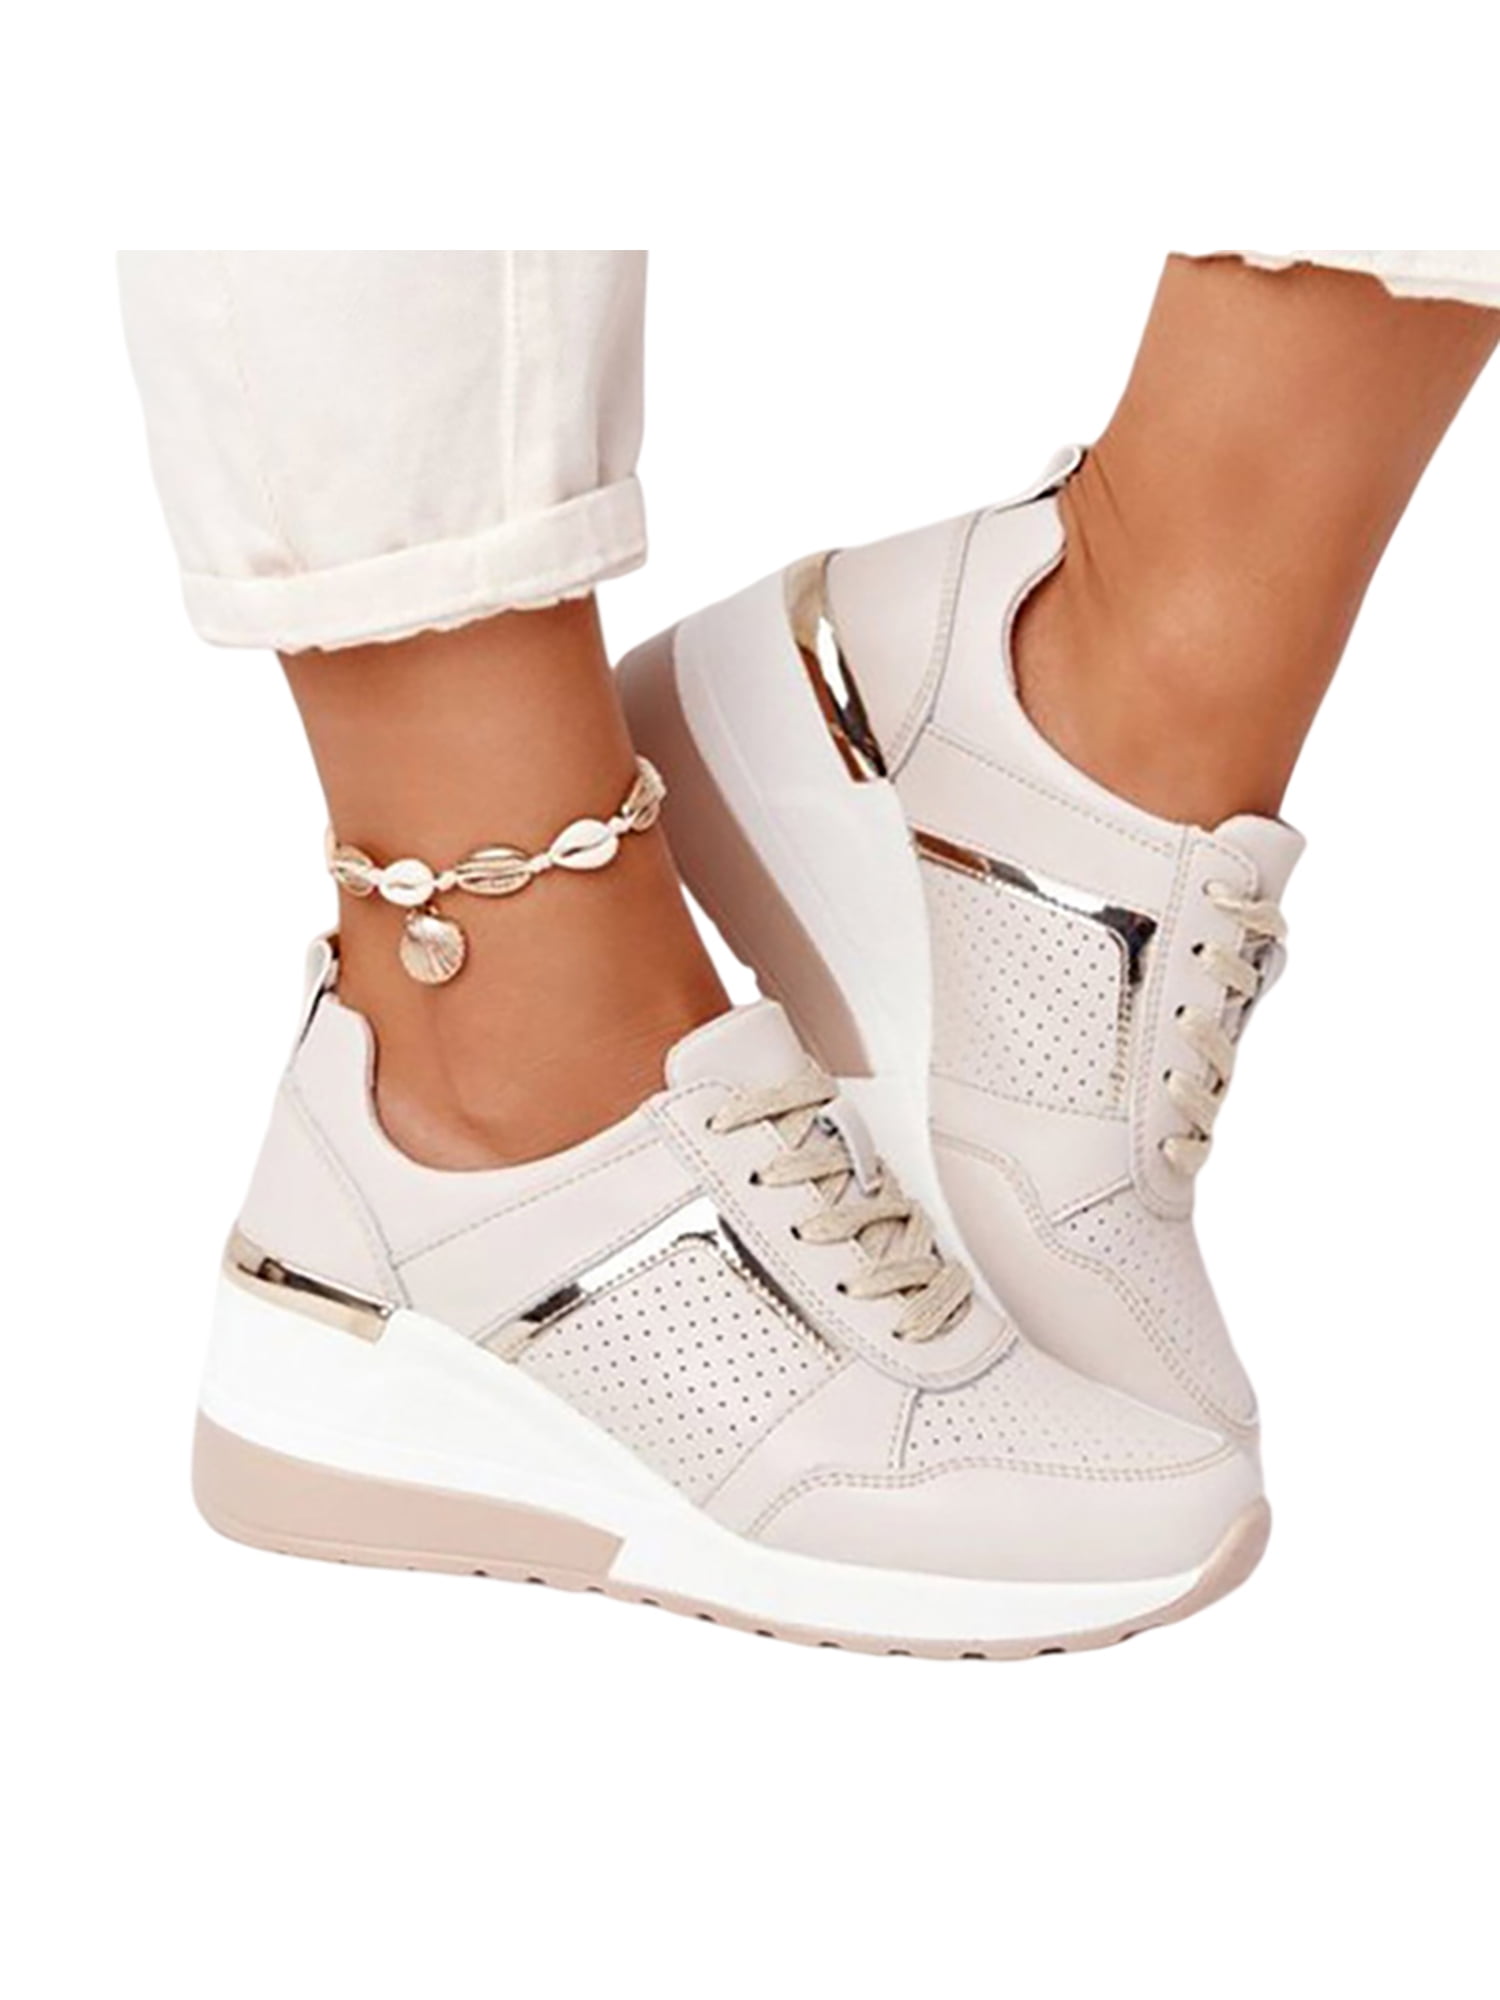 WOMENS LADIES CHUNKY SOLE PARTY SNEAKERS TRAINERS SPORT CASUAL PLATFORM SHOES